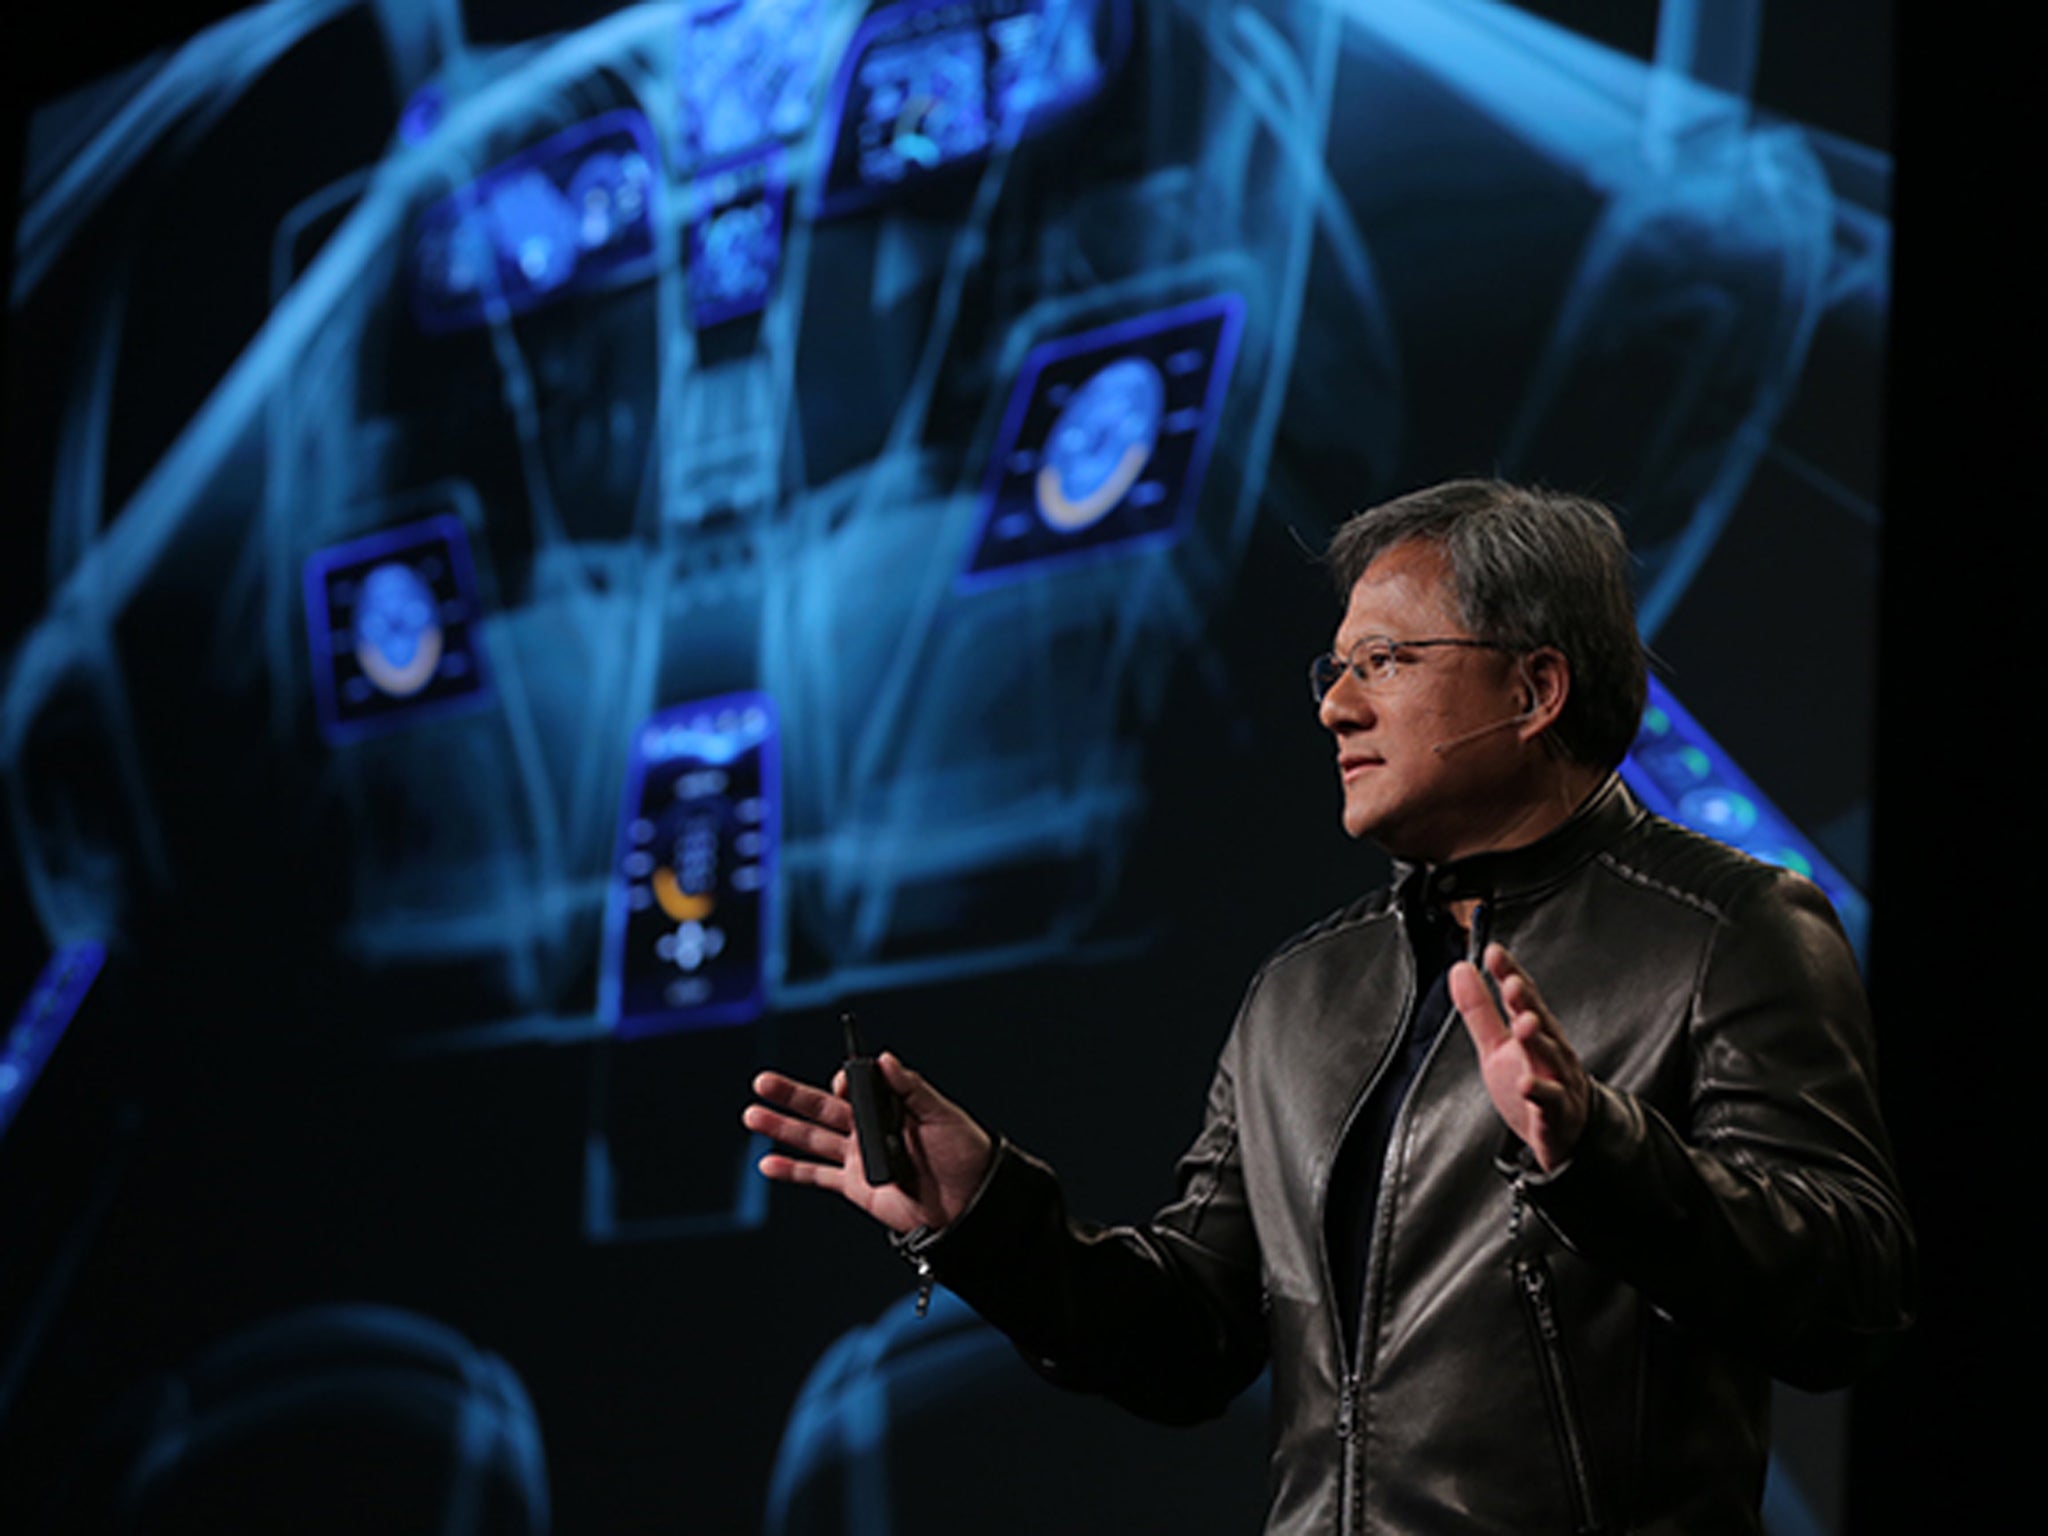 The X1 being announced at CES 2015, along with Nvidia's new technologies for cars